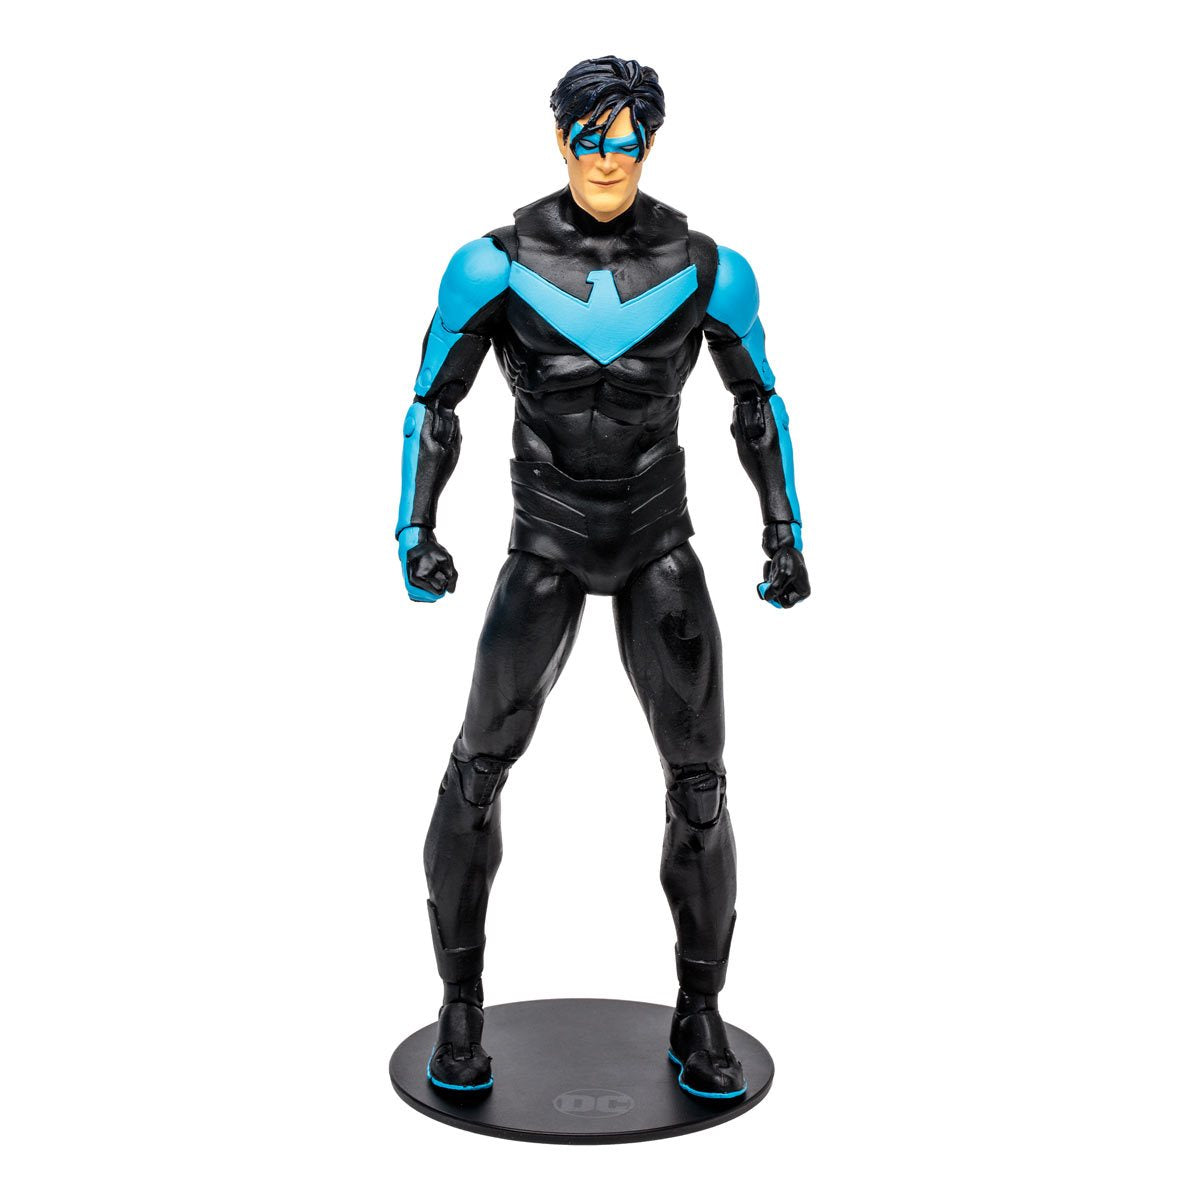 Mcfarlane DC Multiverse: Build-A Wave Titans - Nightwing Action Figure